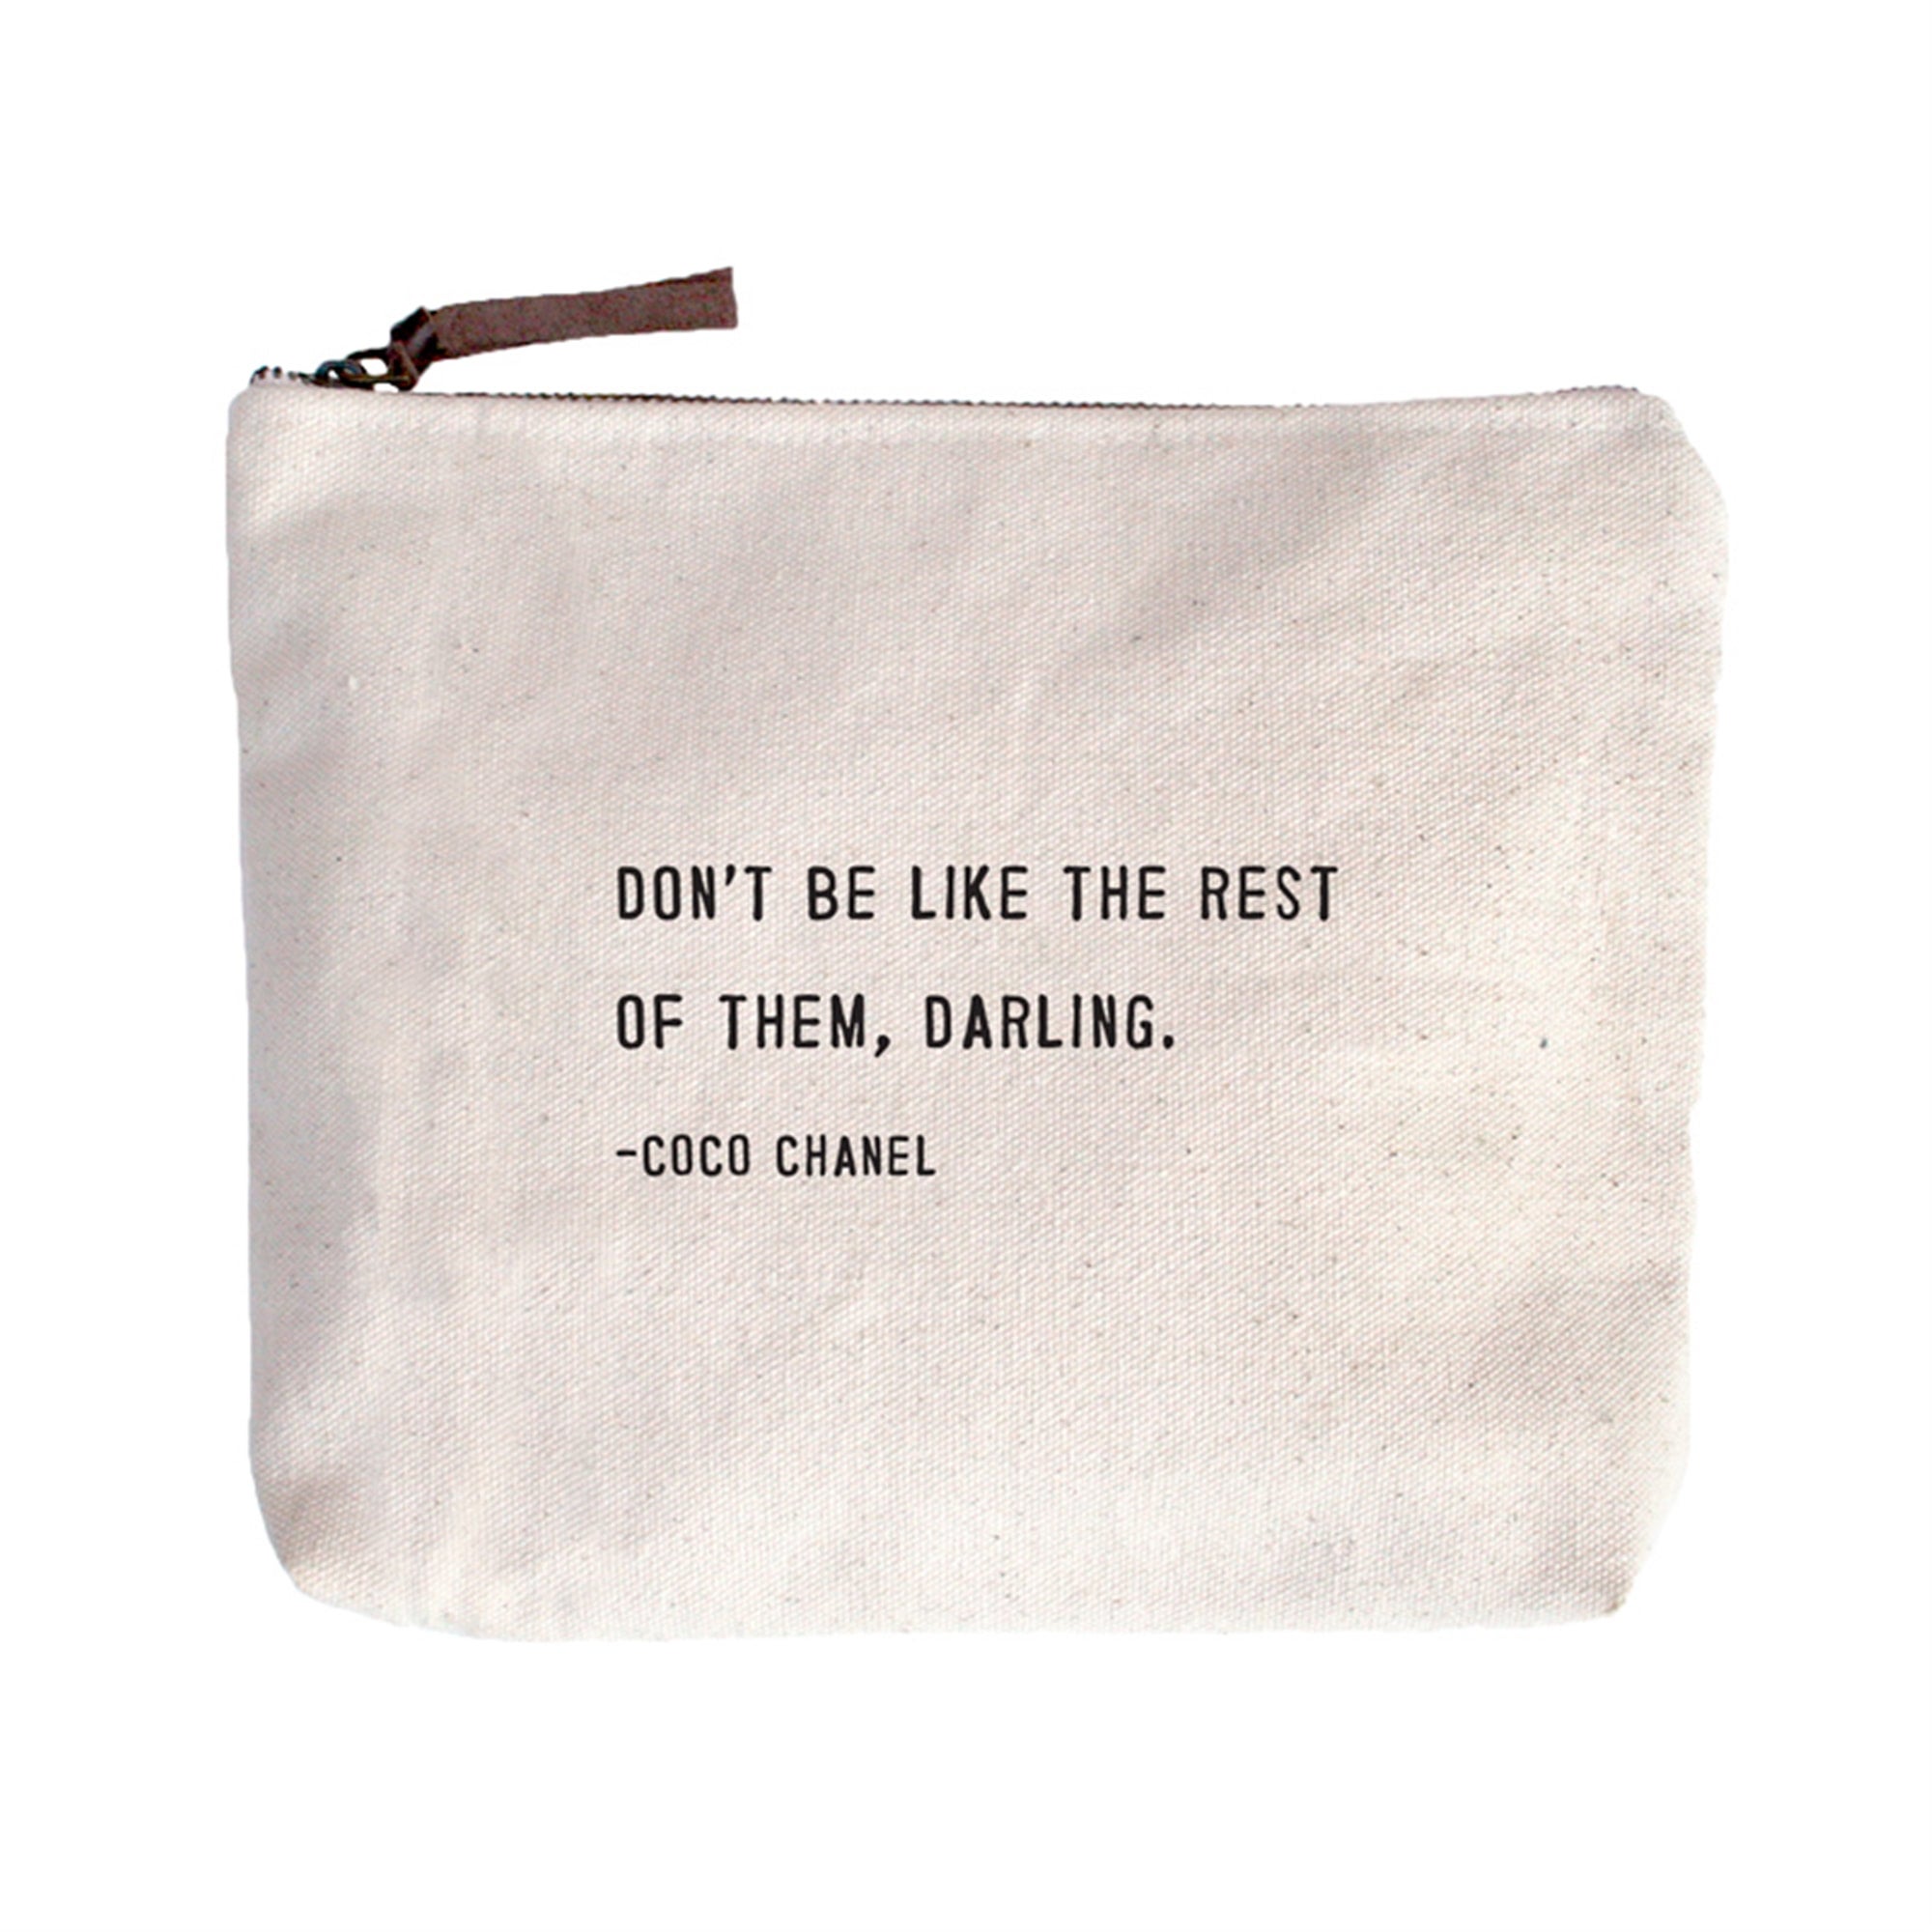 Coco Chanel (Don't Be Like The Rest Of Them) Canvas Zip Bag - 8.5x7.5